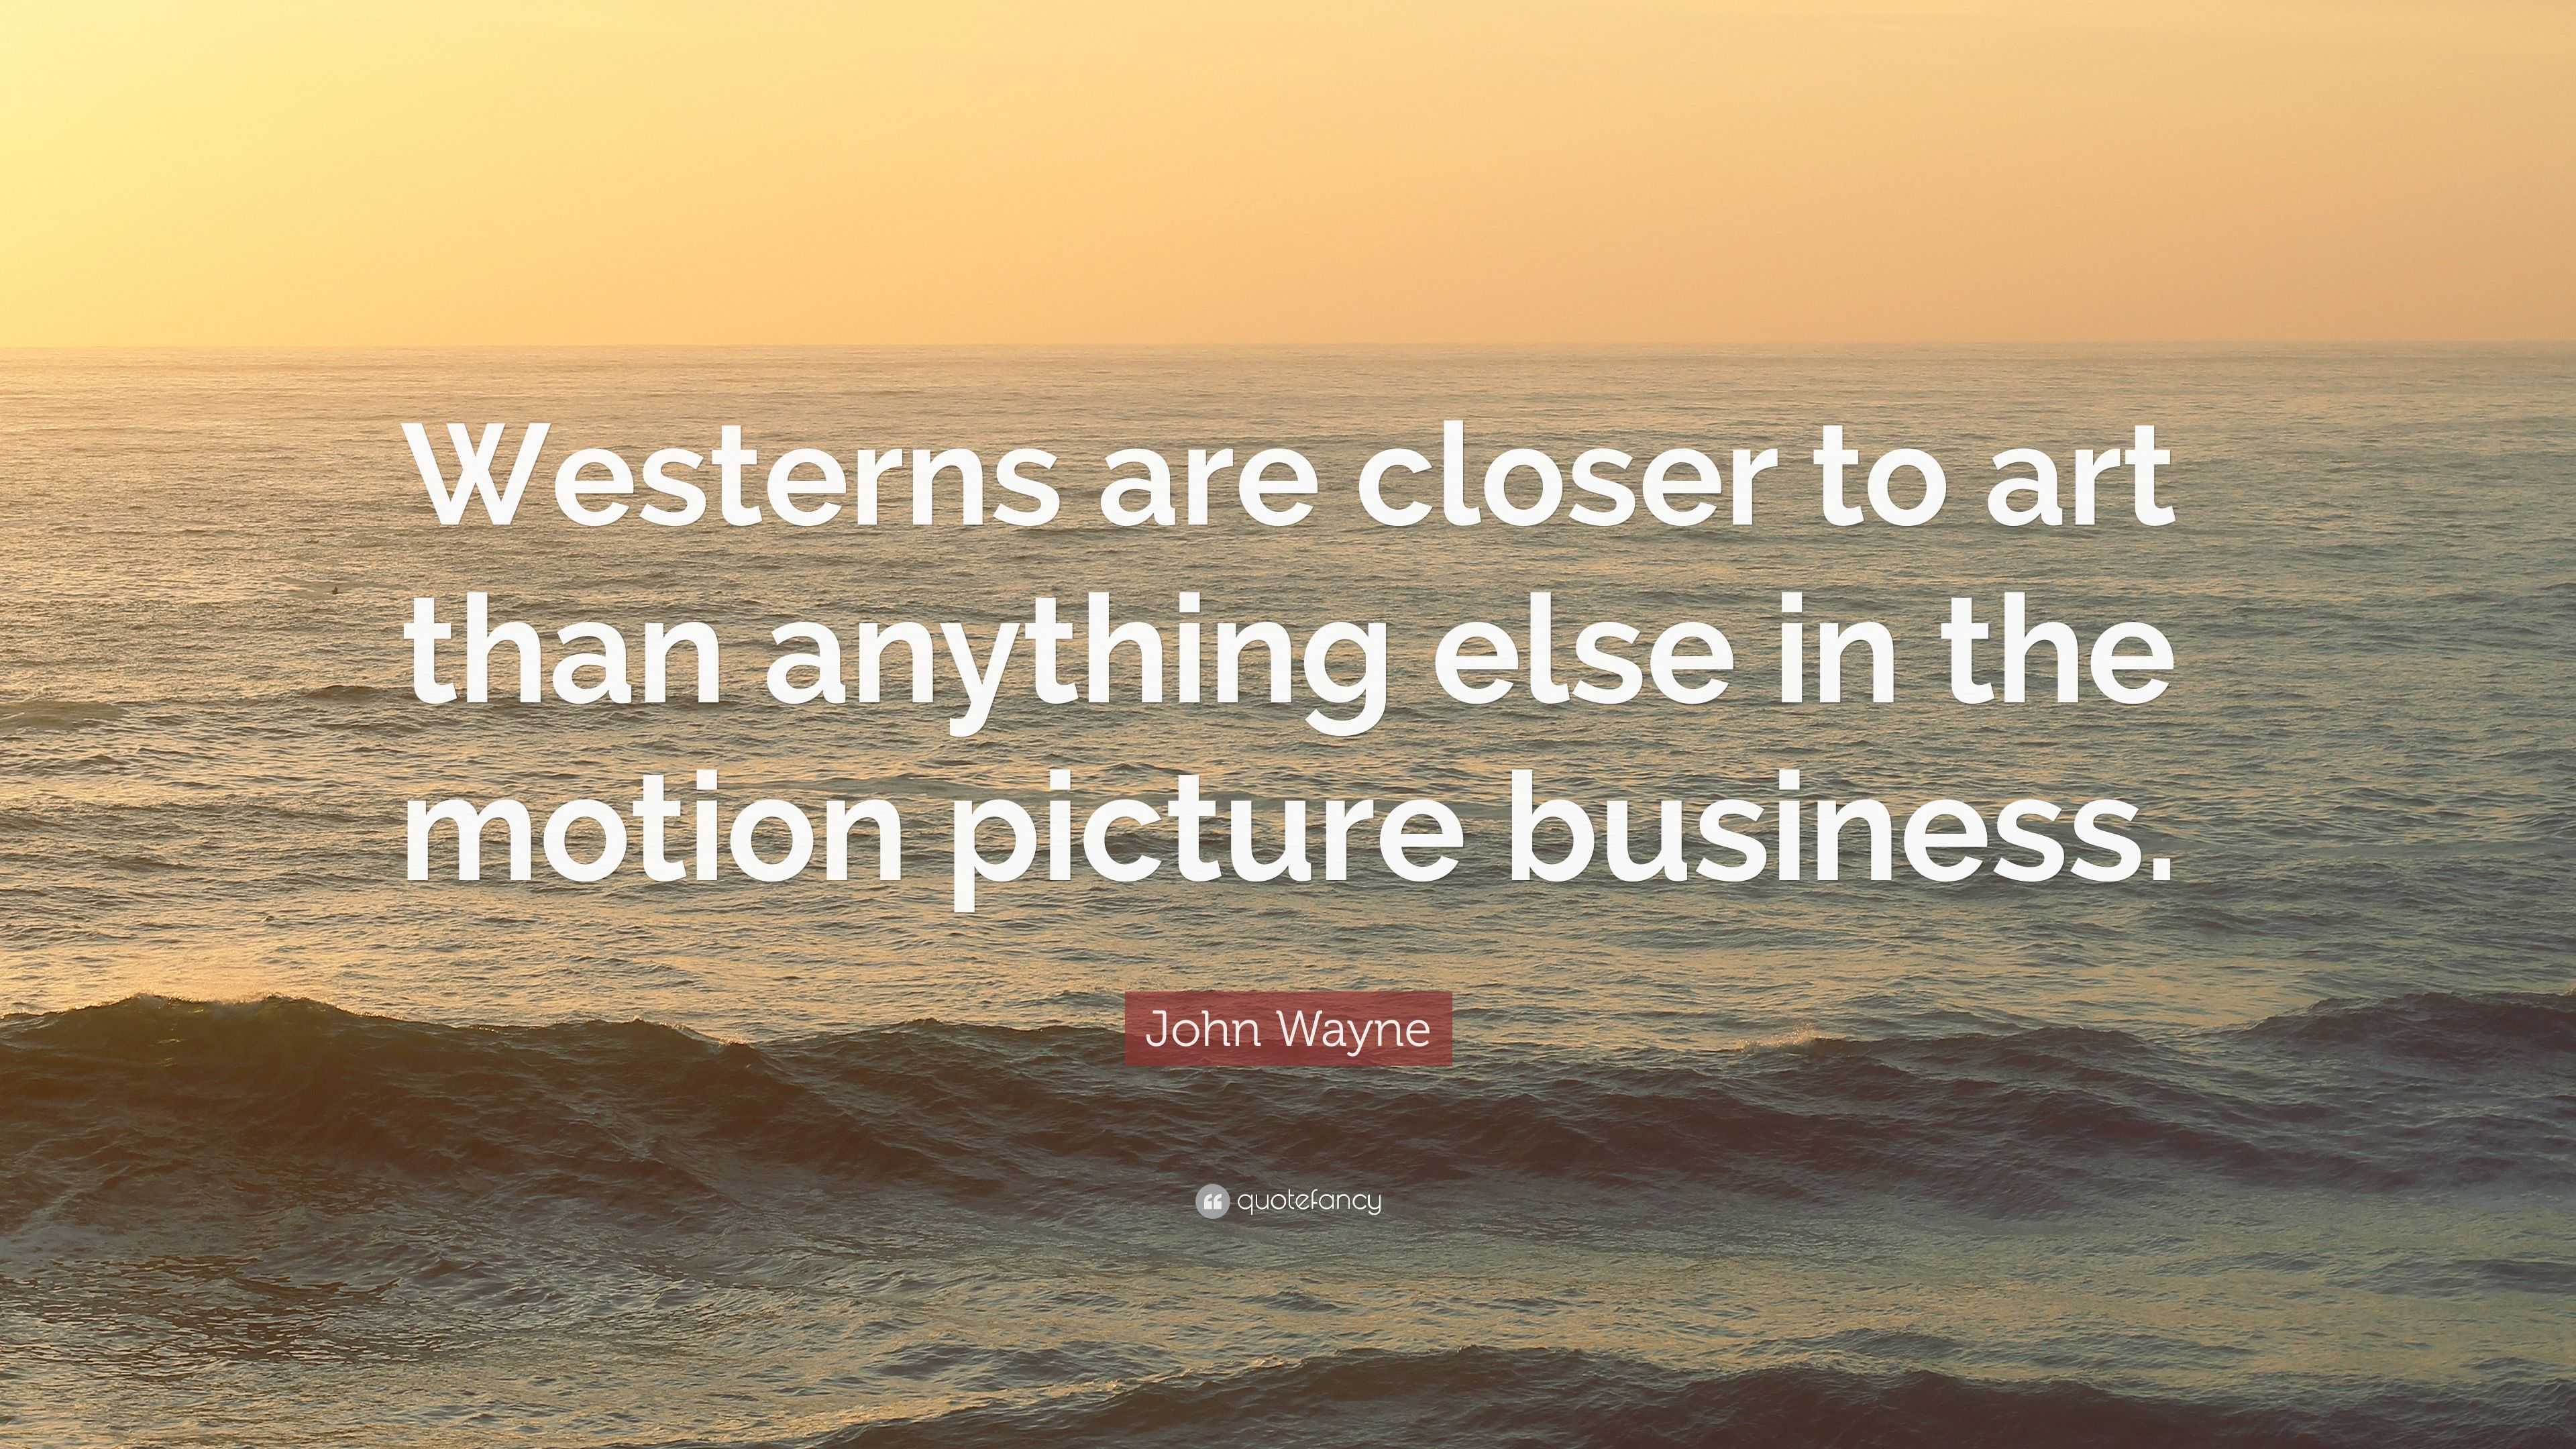 John Wayne Quote: “Westerns are closer to art than anything else in the